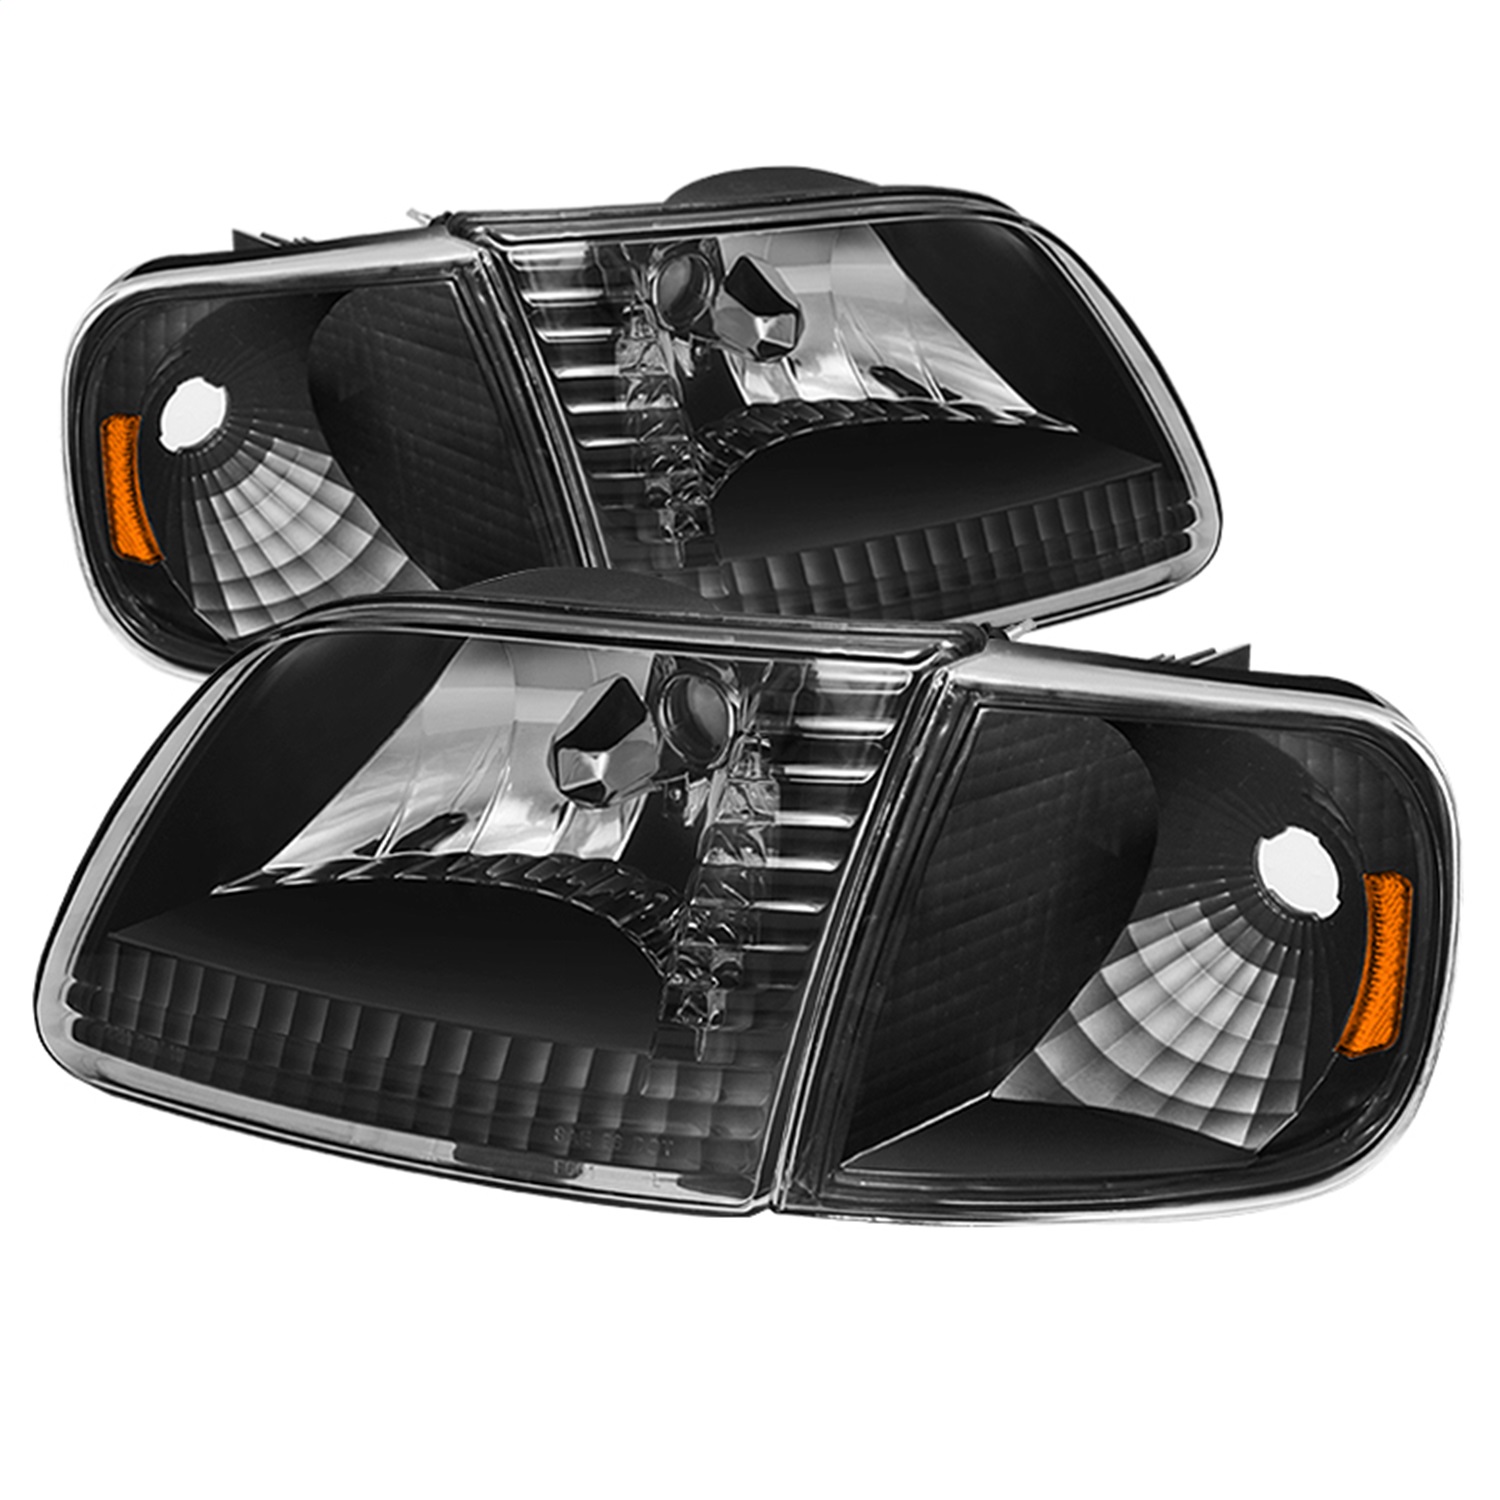 Spyder Auto 5070319 XTune Crystal Headlights Fits 97-03 Expedition F-150